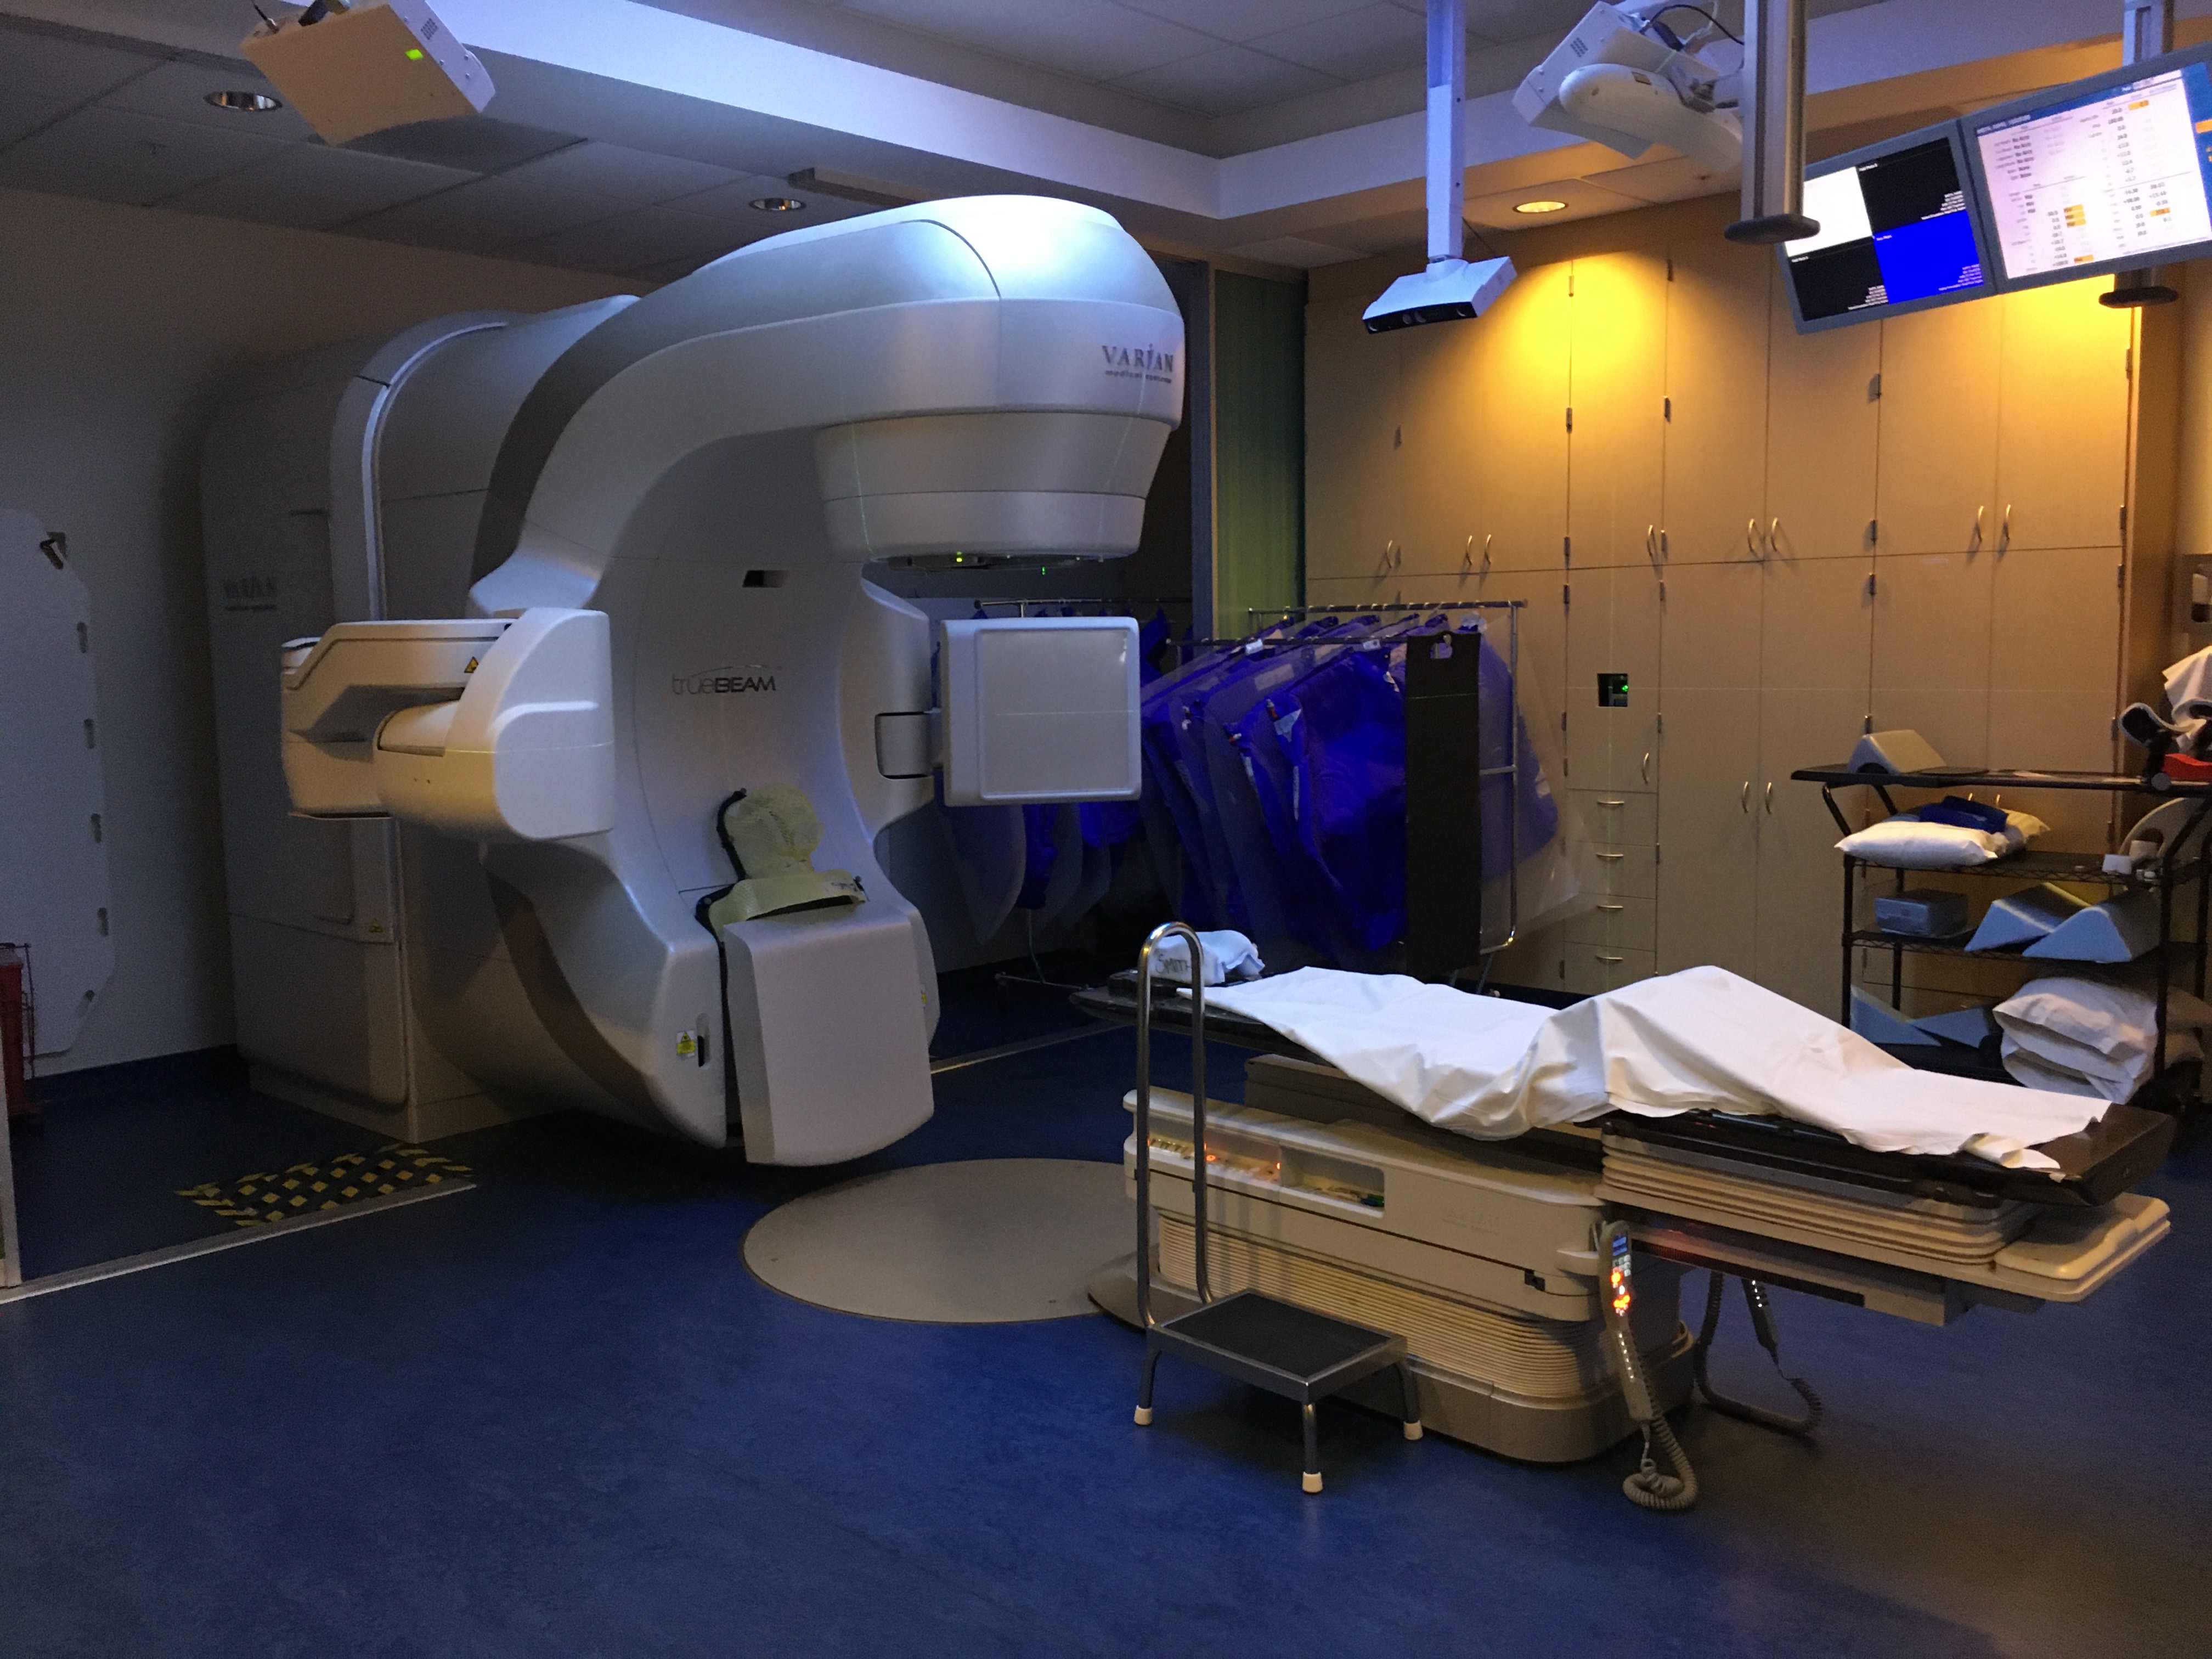 A photo of the radiation treatment room, with the table in the center and the machine.